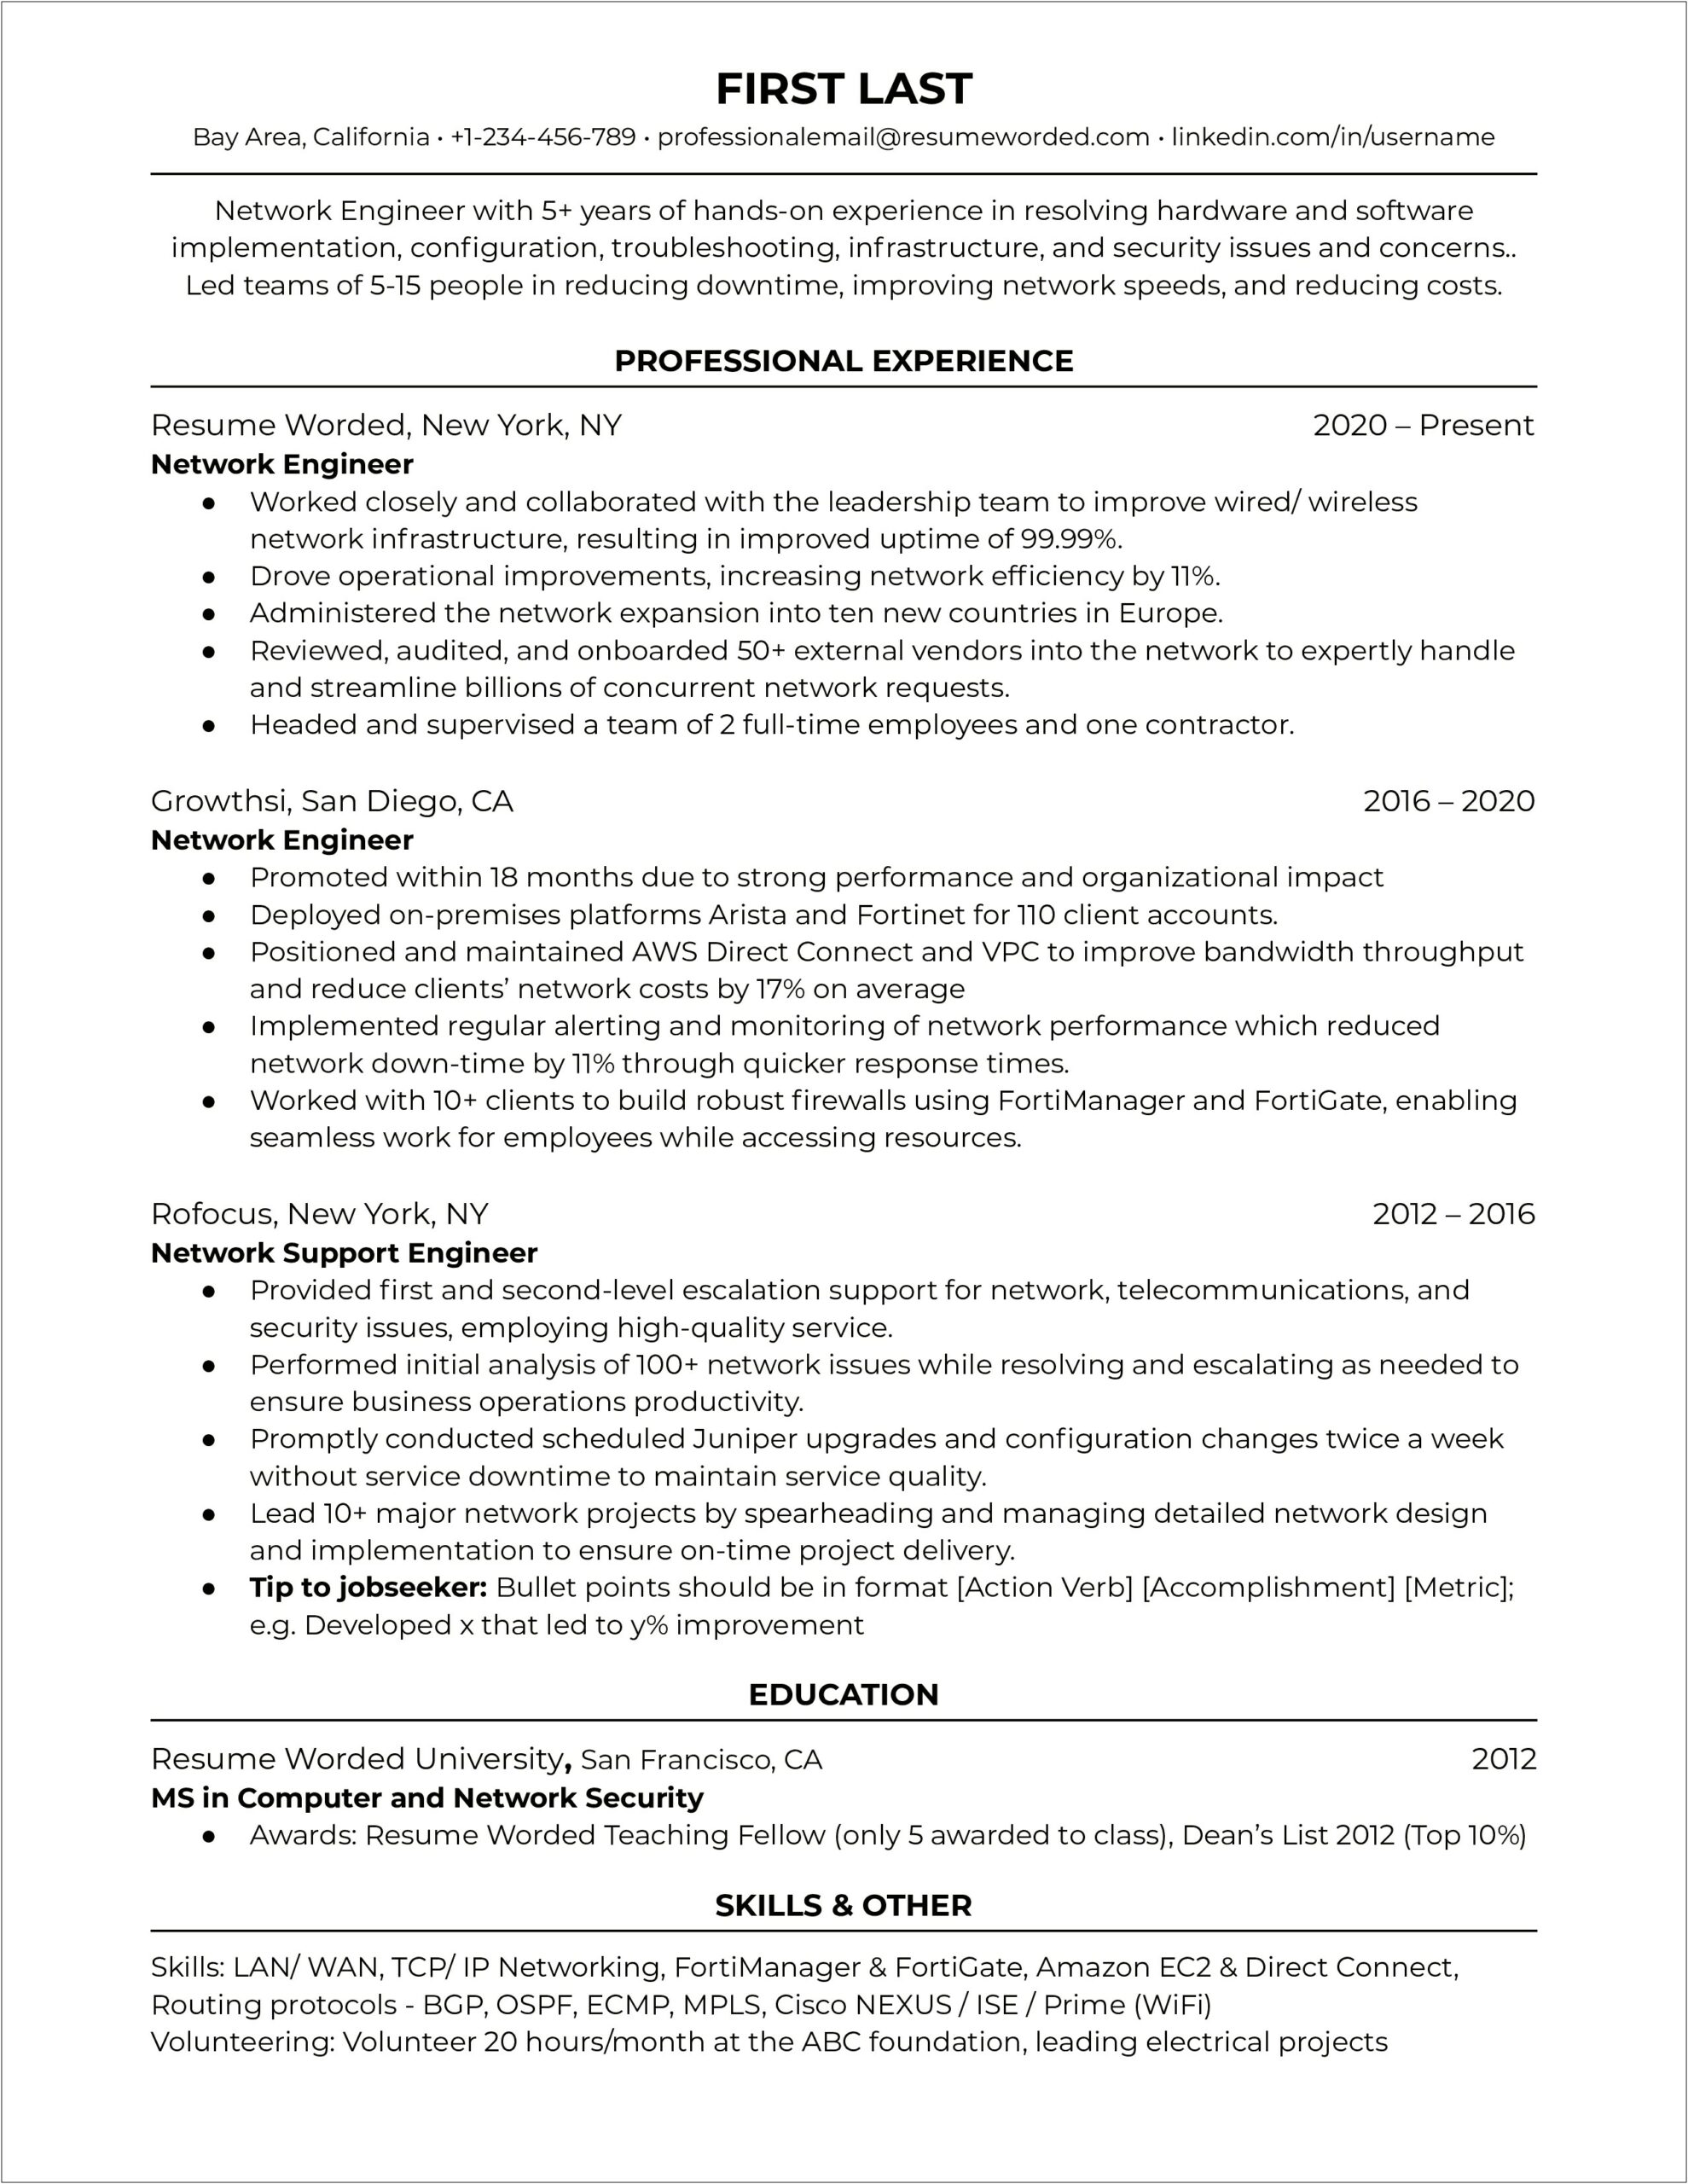 Networking Skills On A Resume